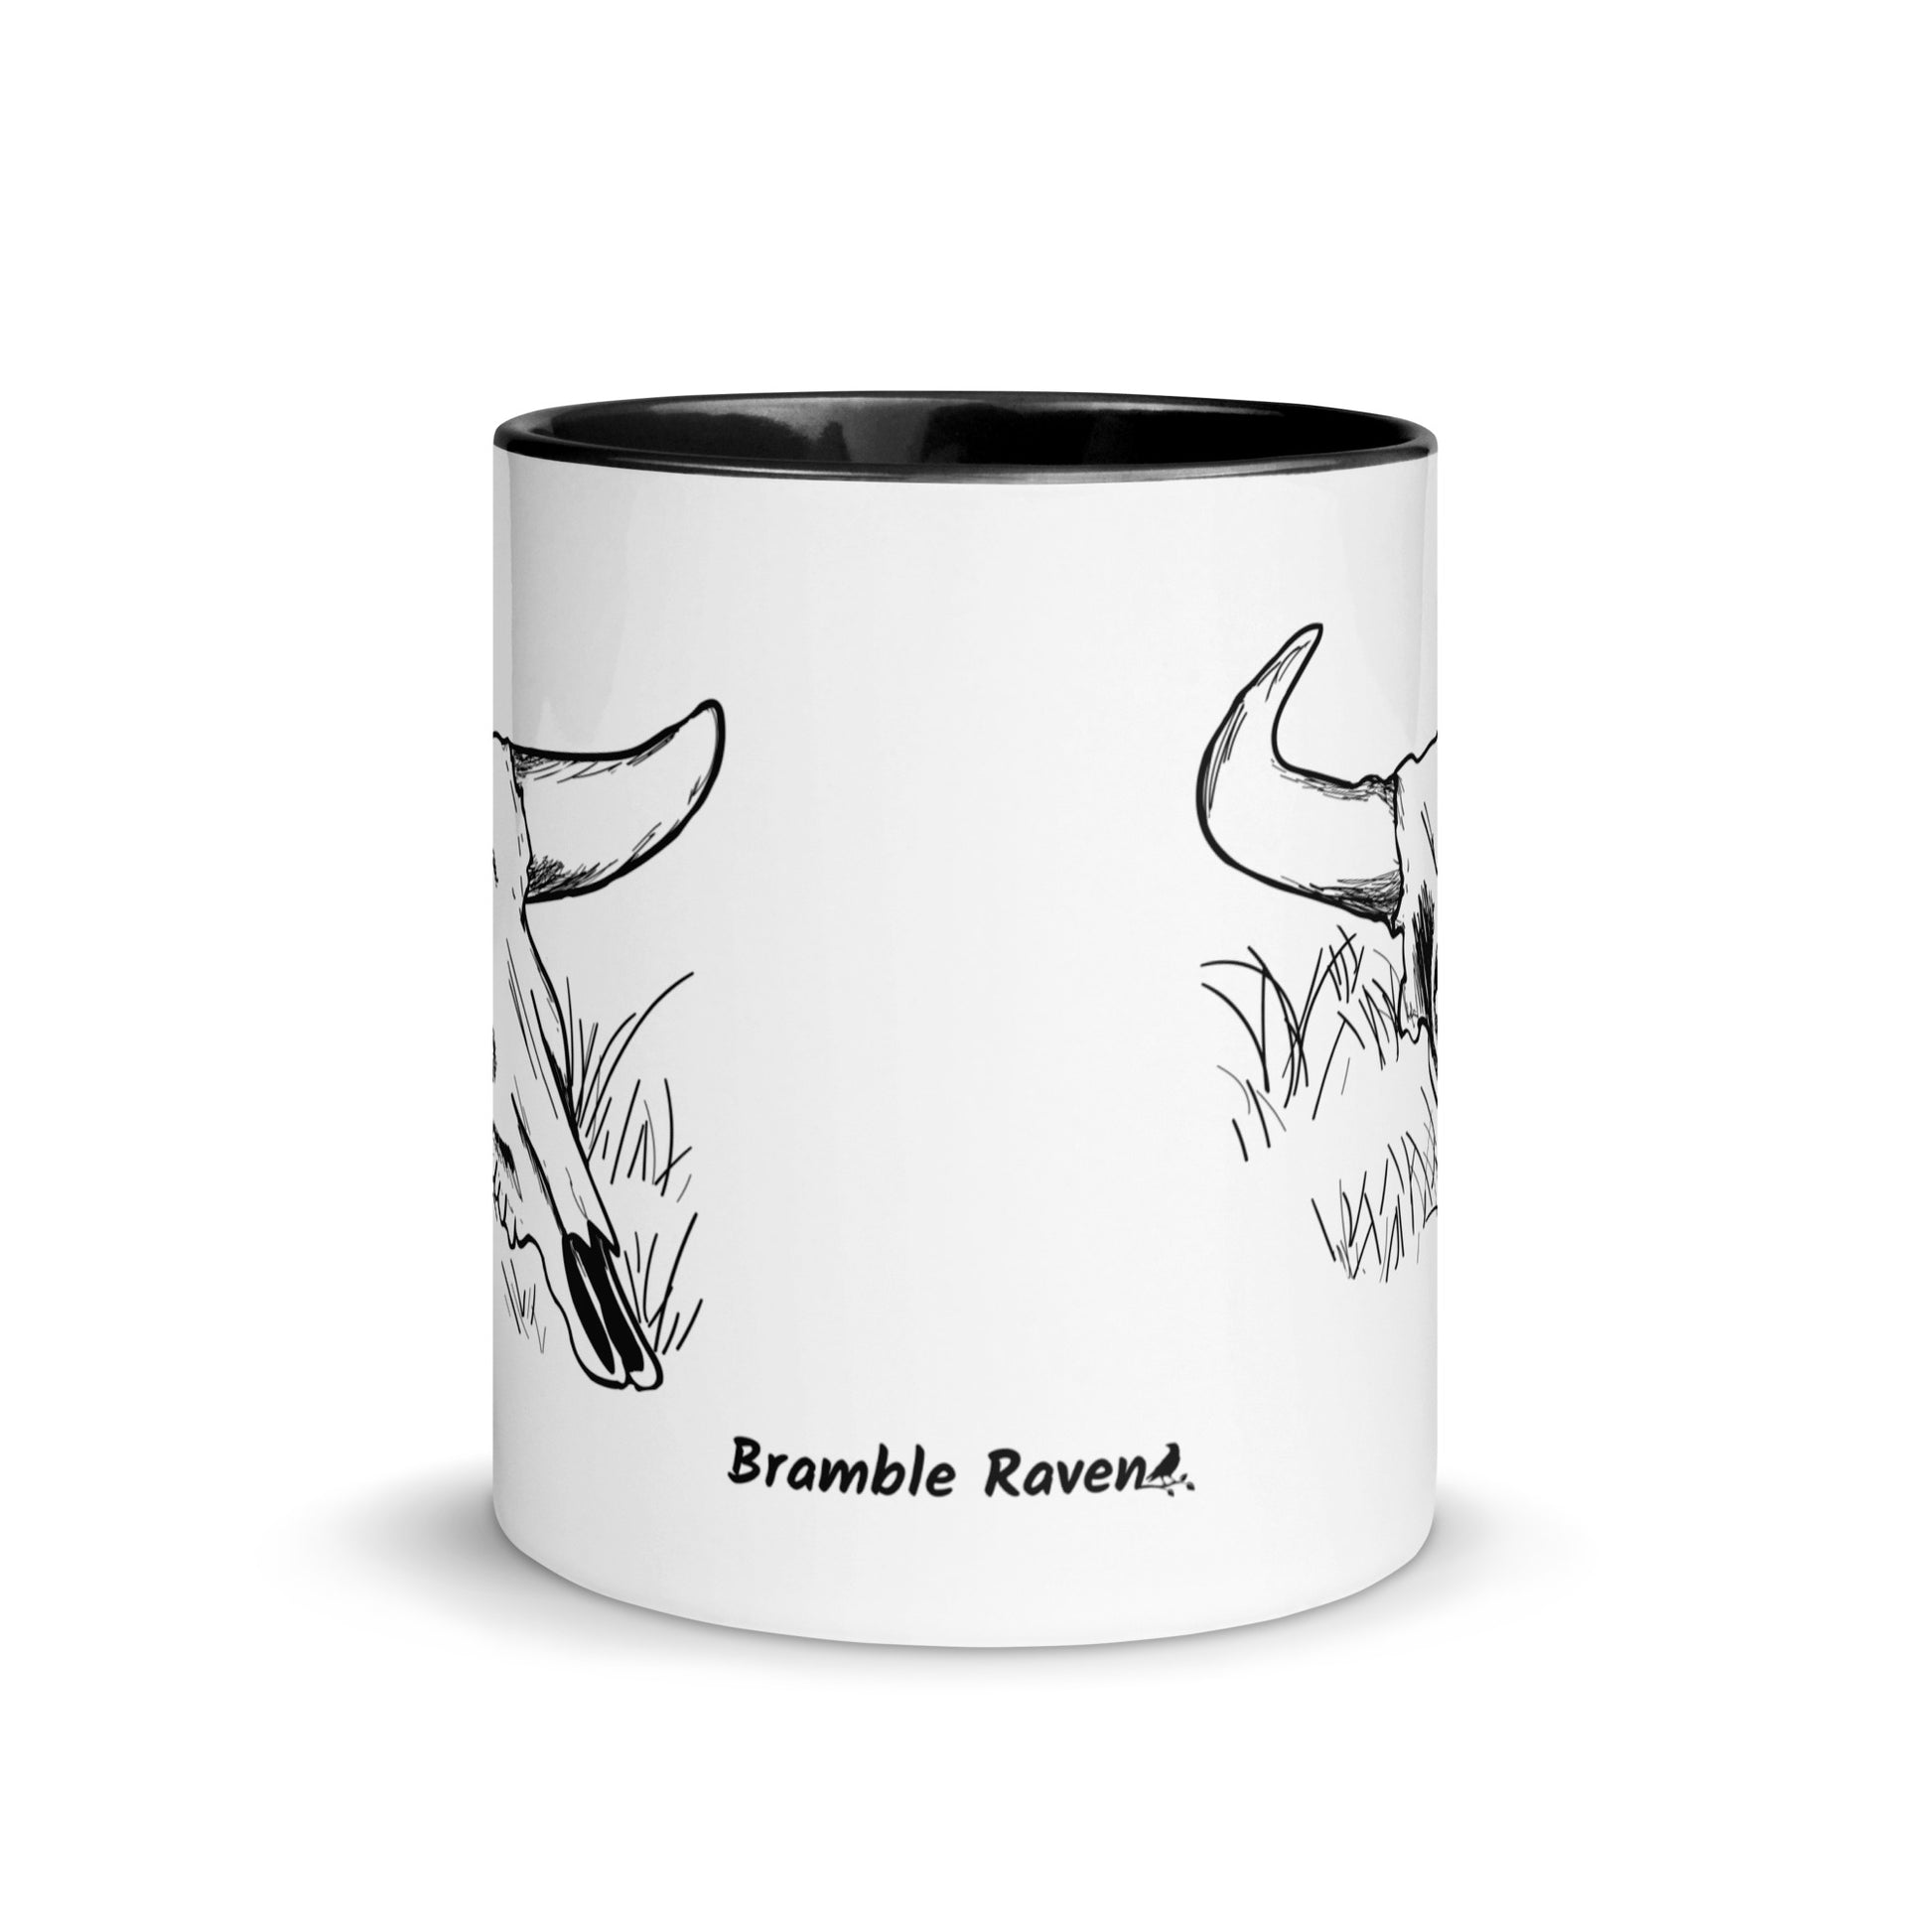 11 ounce ceramic mug. White with black handle and inside. Features double sided image of a cow skull cradling a bird nest. Front view.